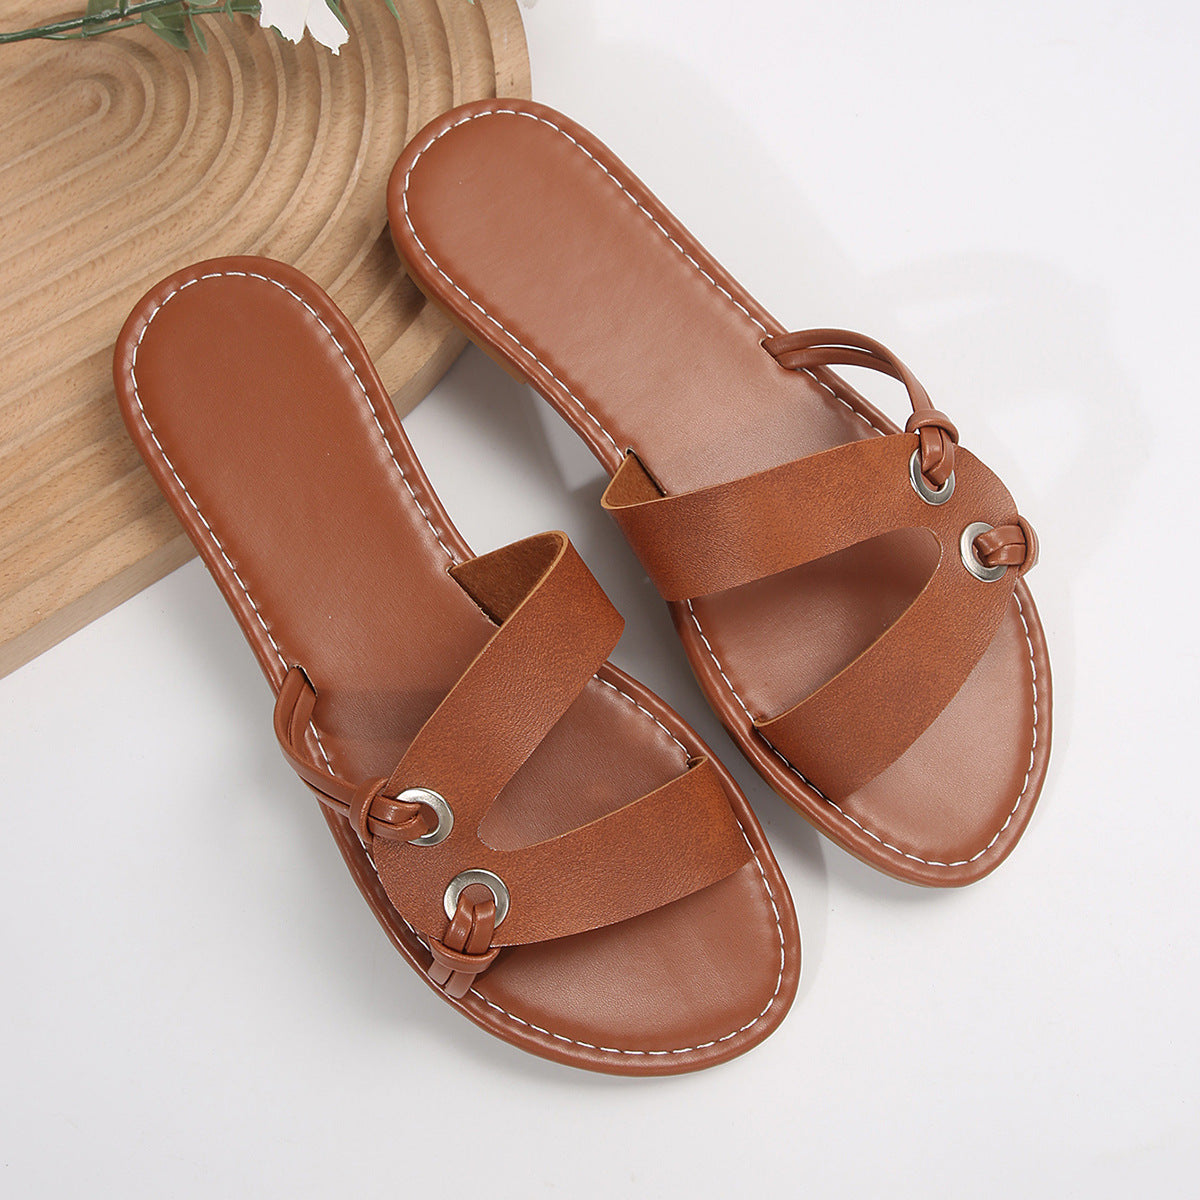 Round Toe Flat Sandals Summer Fashion Casual Non-slip Slides Shoes For Women